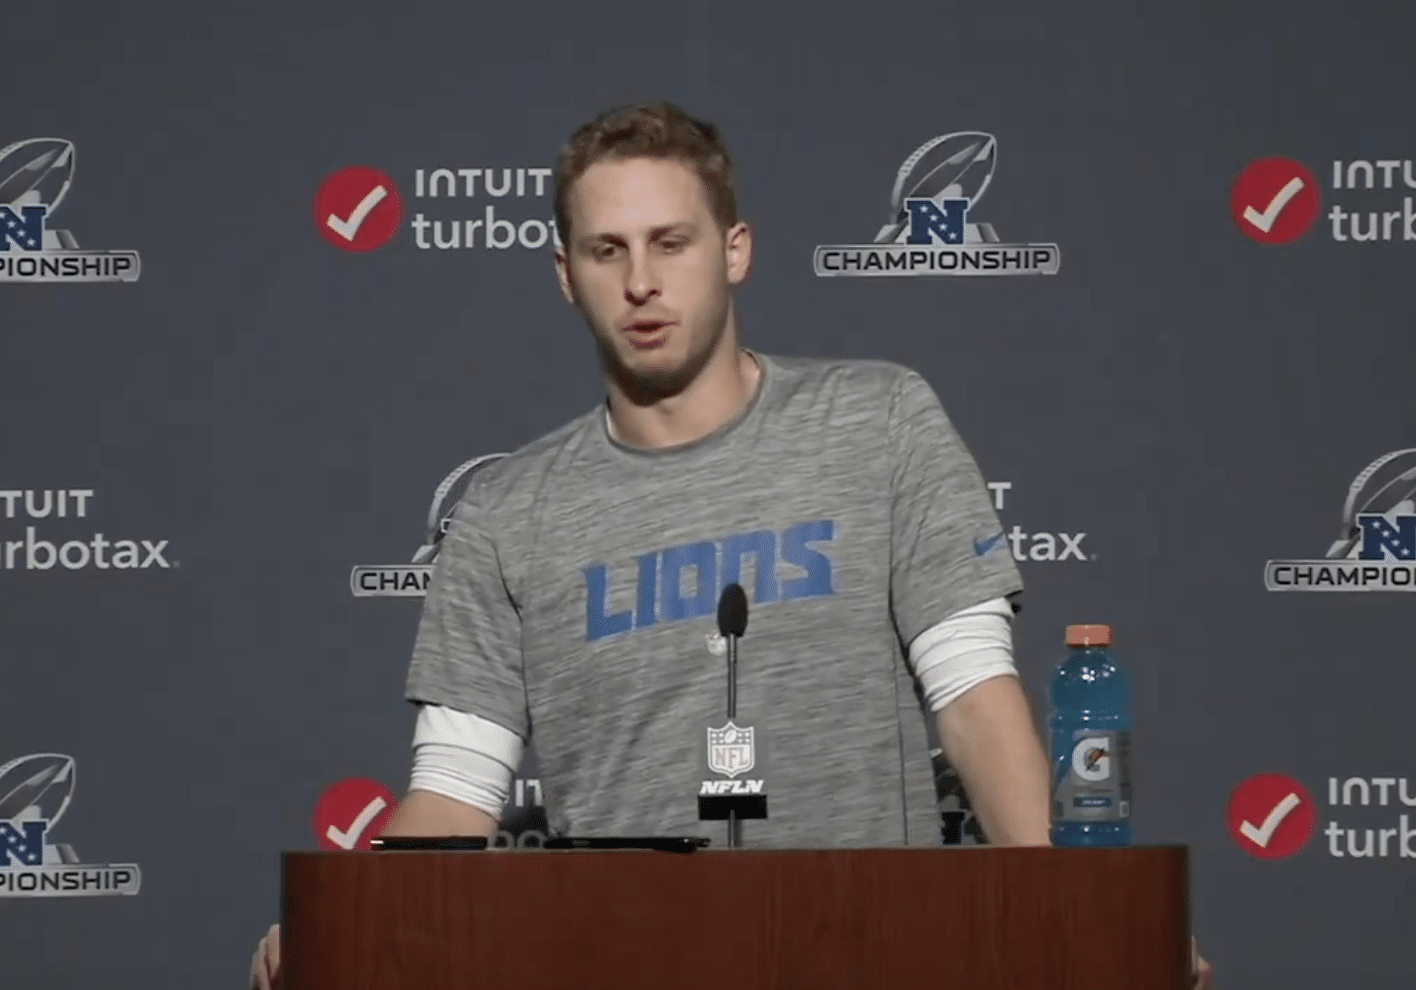 Jared Goff takes to social media,Jared Goff,Detroit Lions